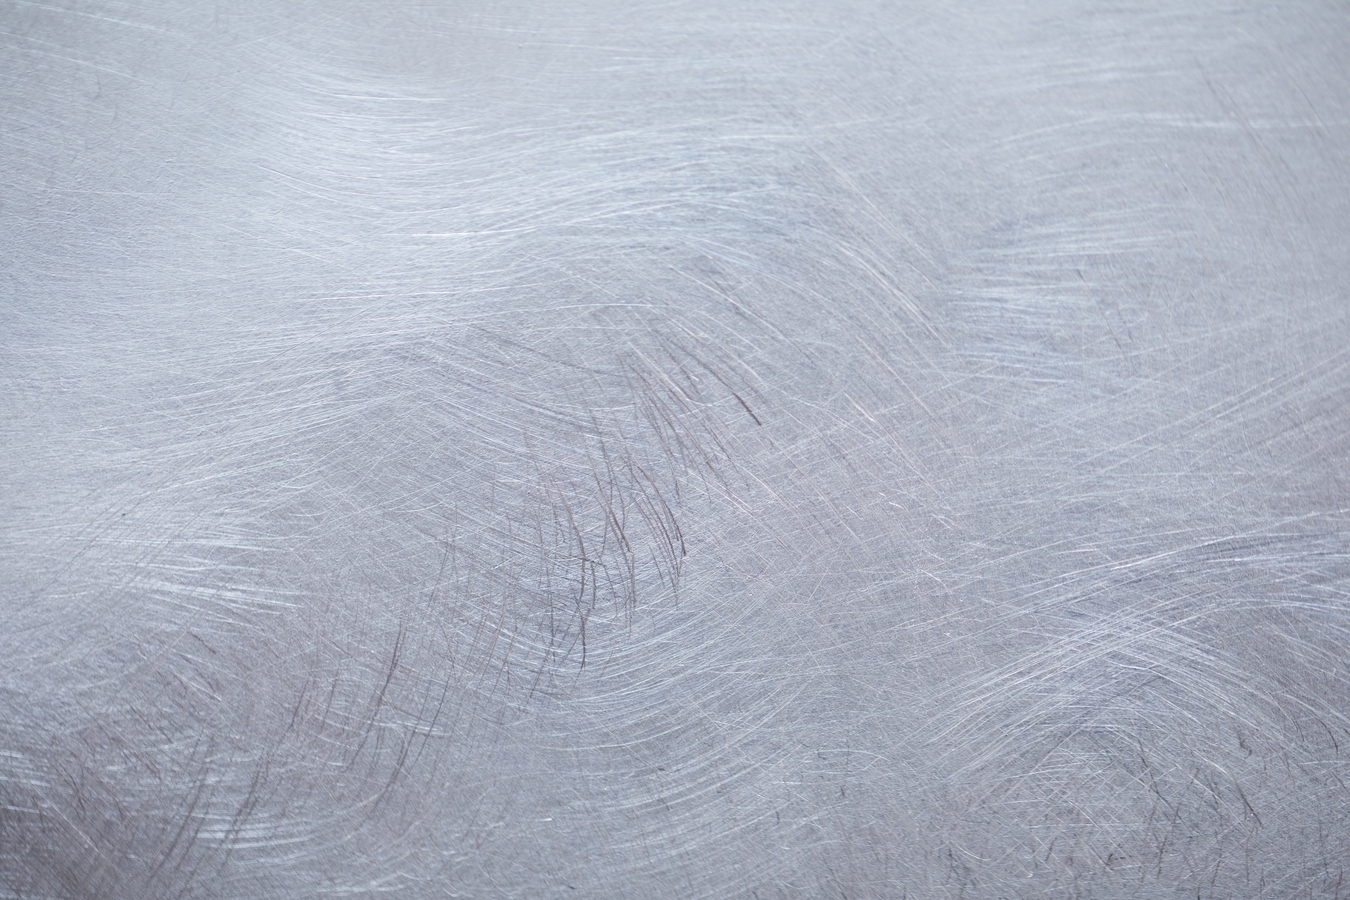 Image: Josephine Jelicich, Cloudy day (detail), folded and brushed aluminum with rivets, 2020. Photo: Janneth Gil.